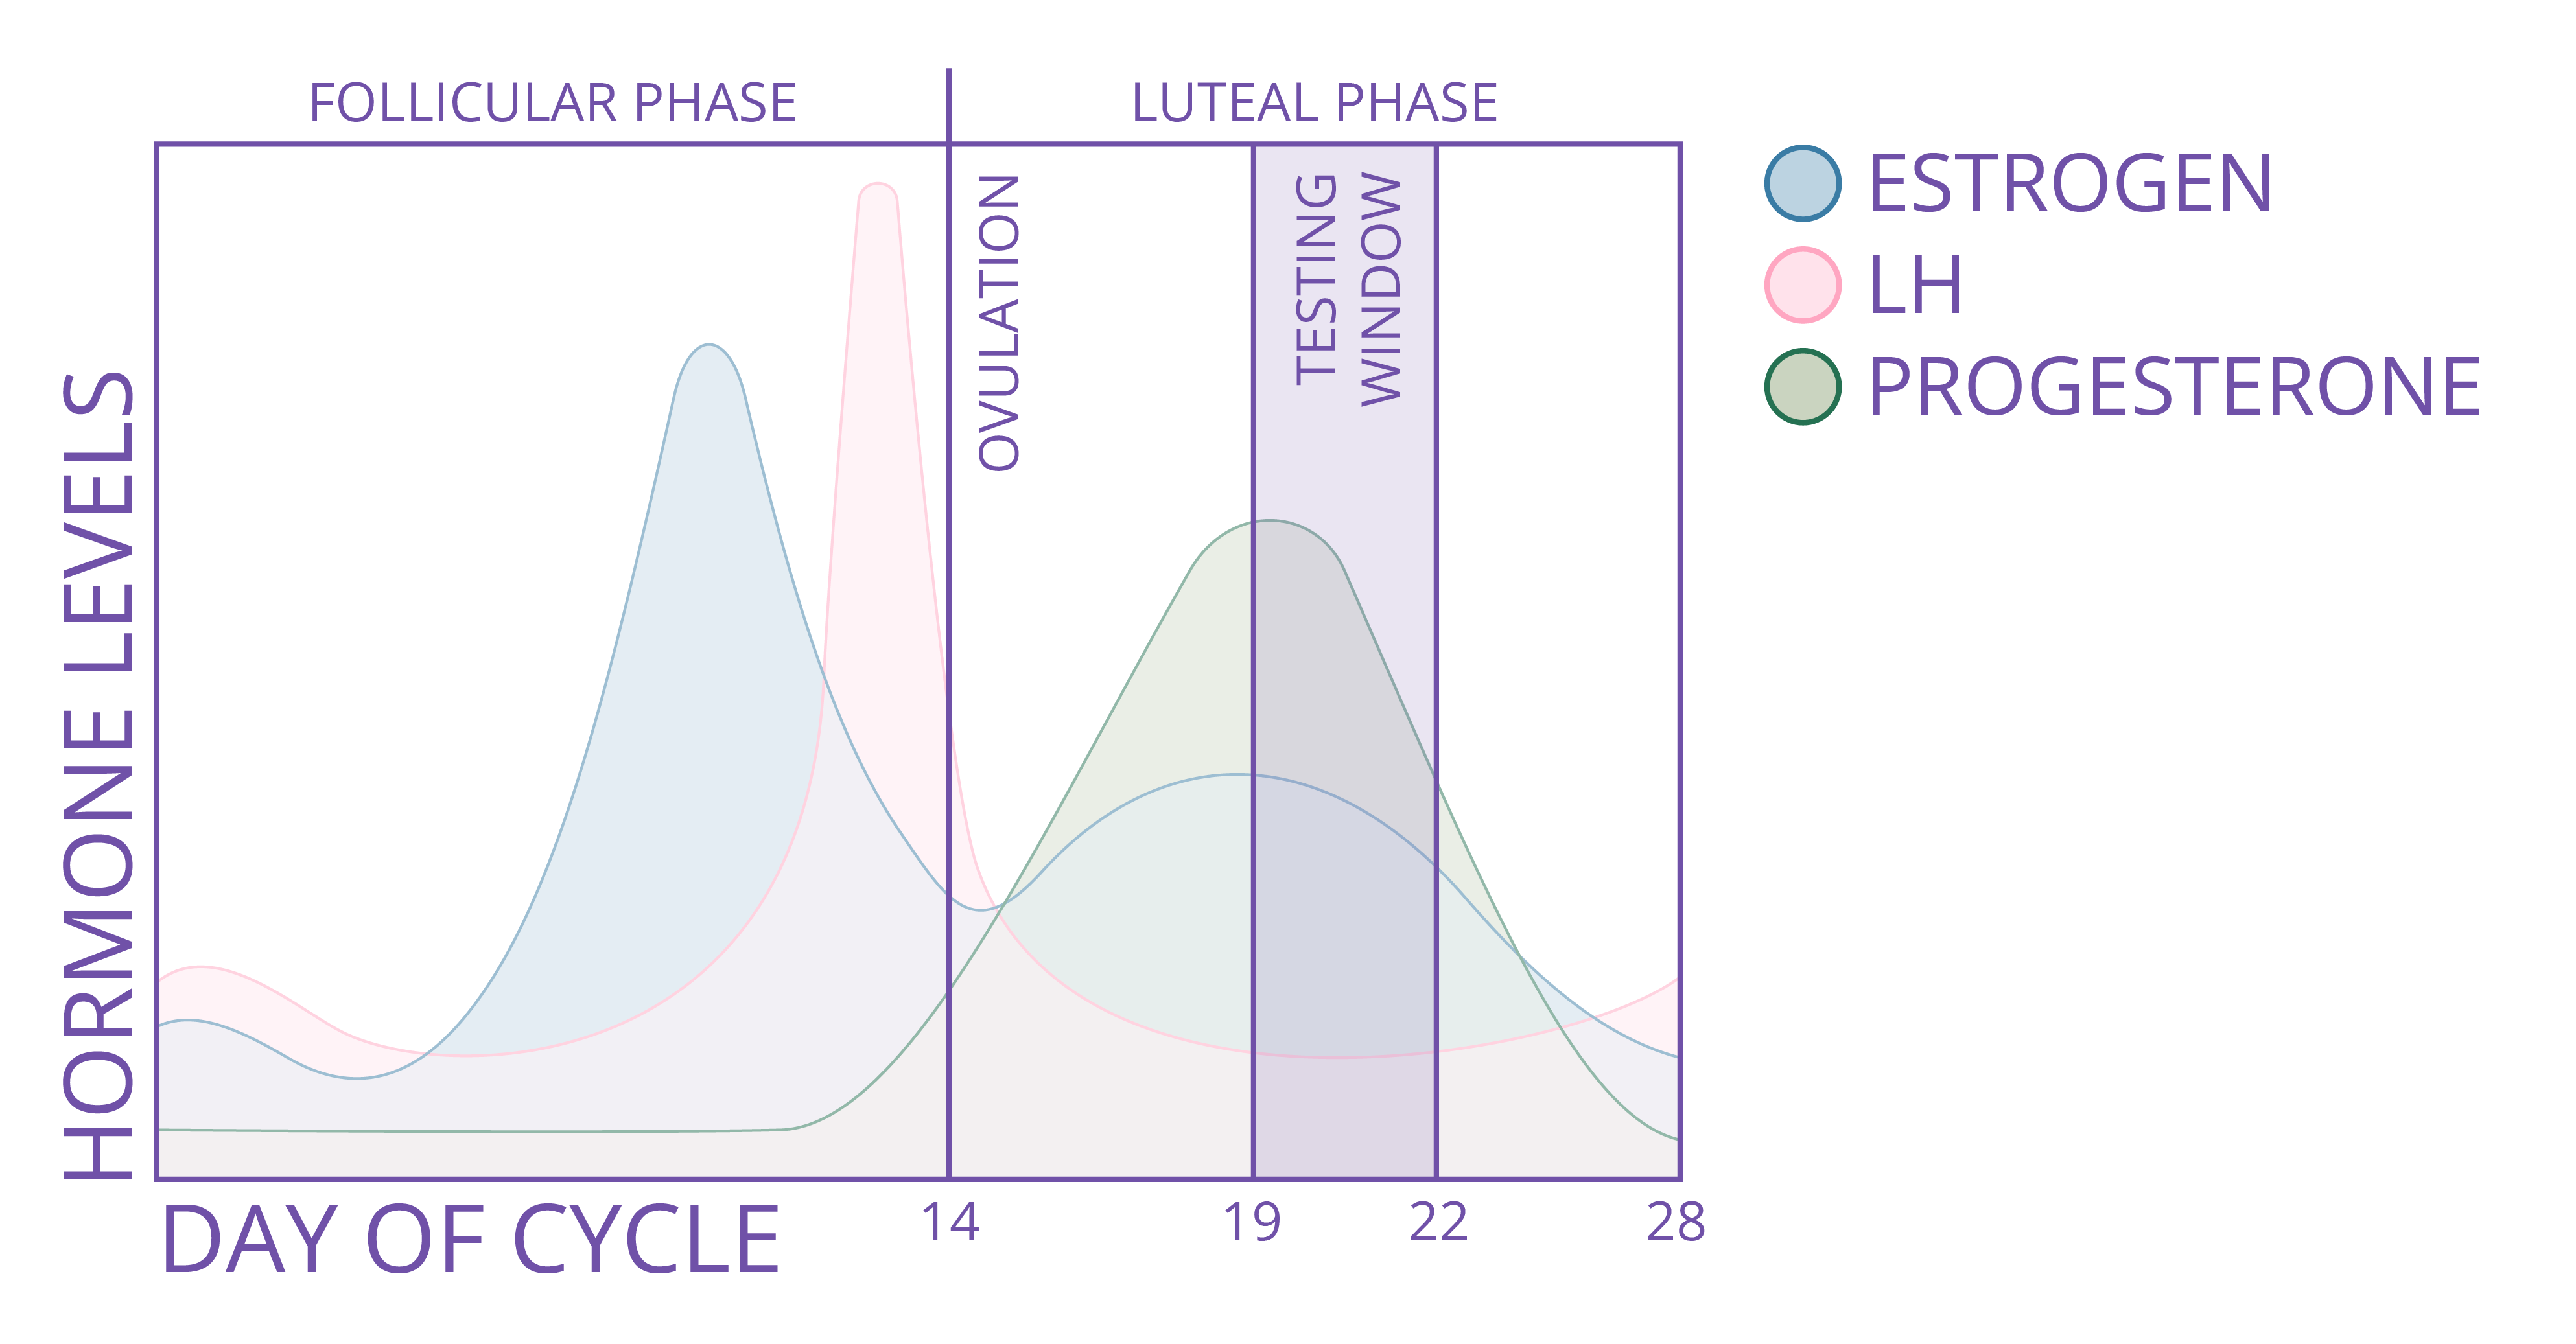 Day by Day Progesterone Levels after Ovulation